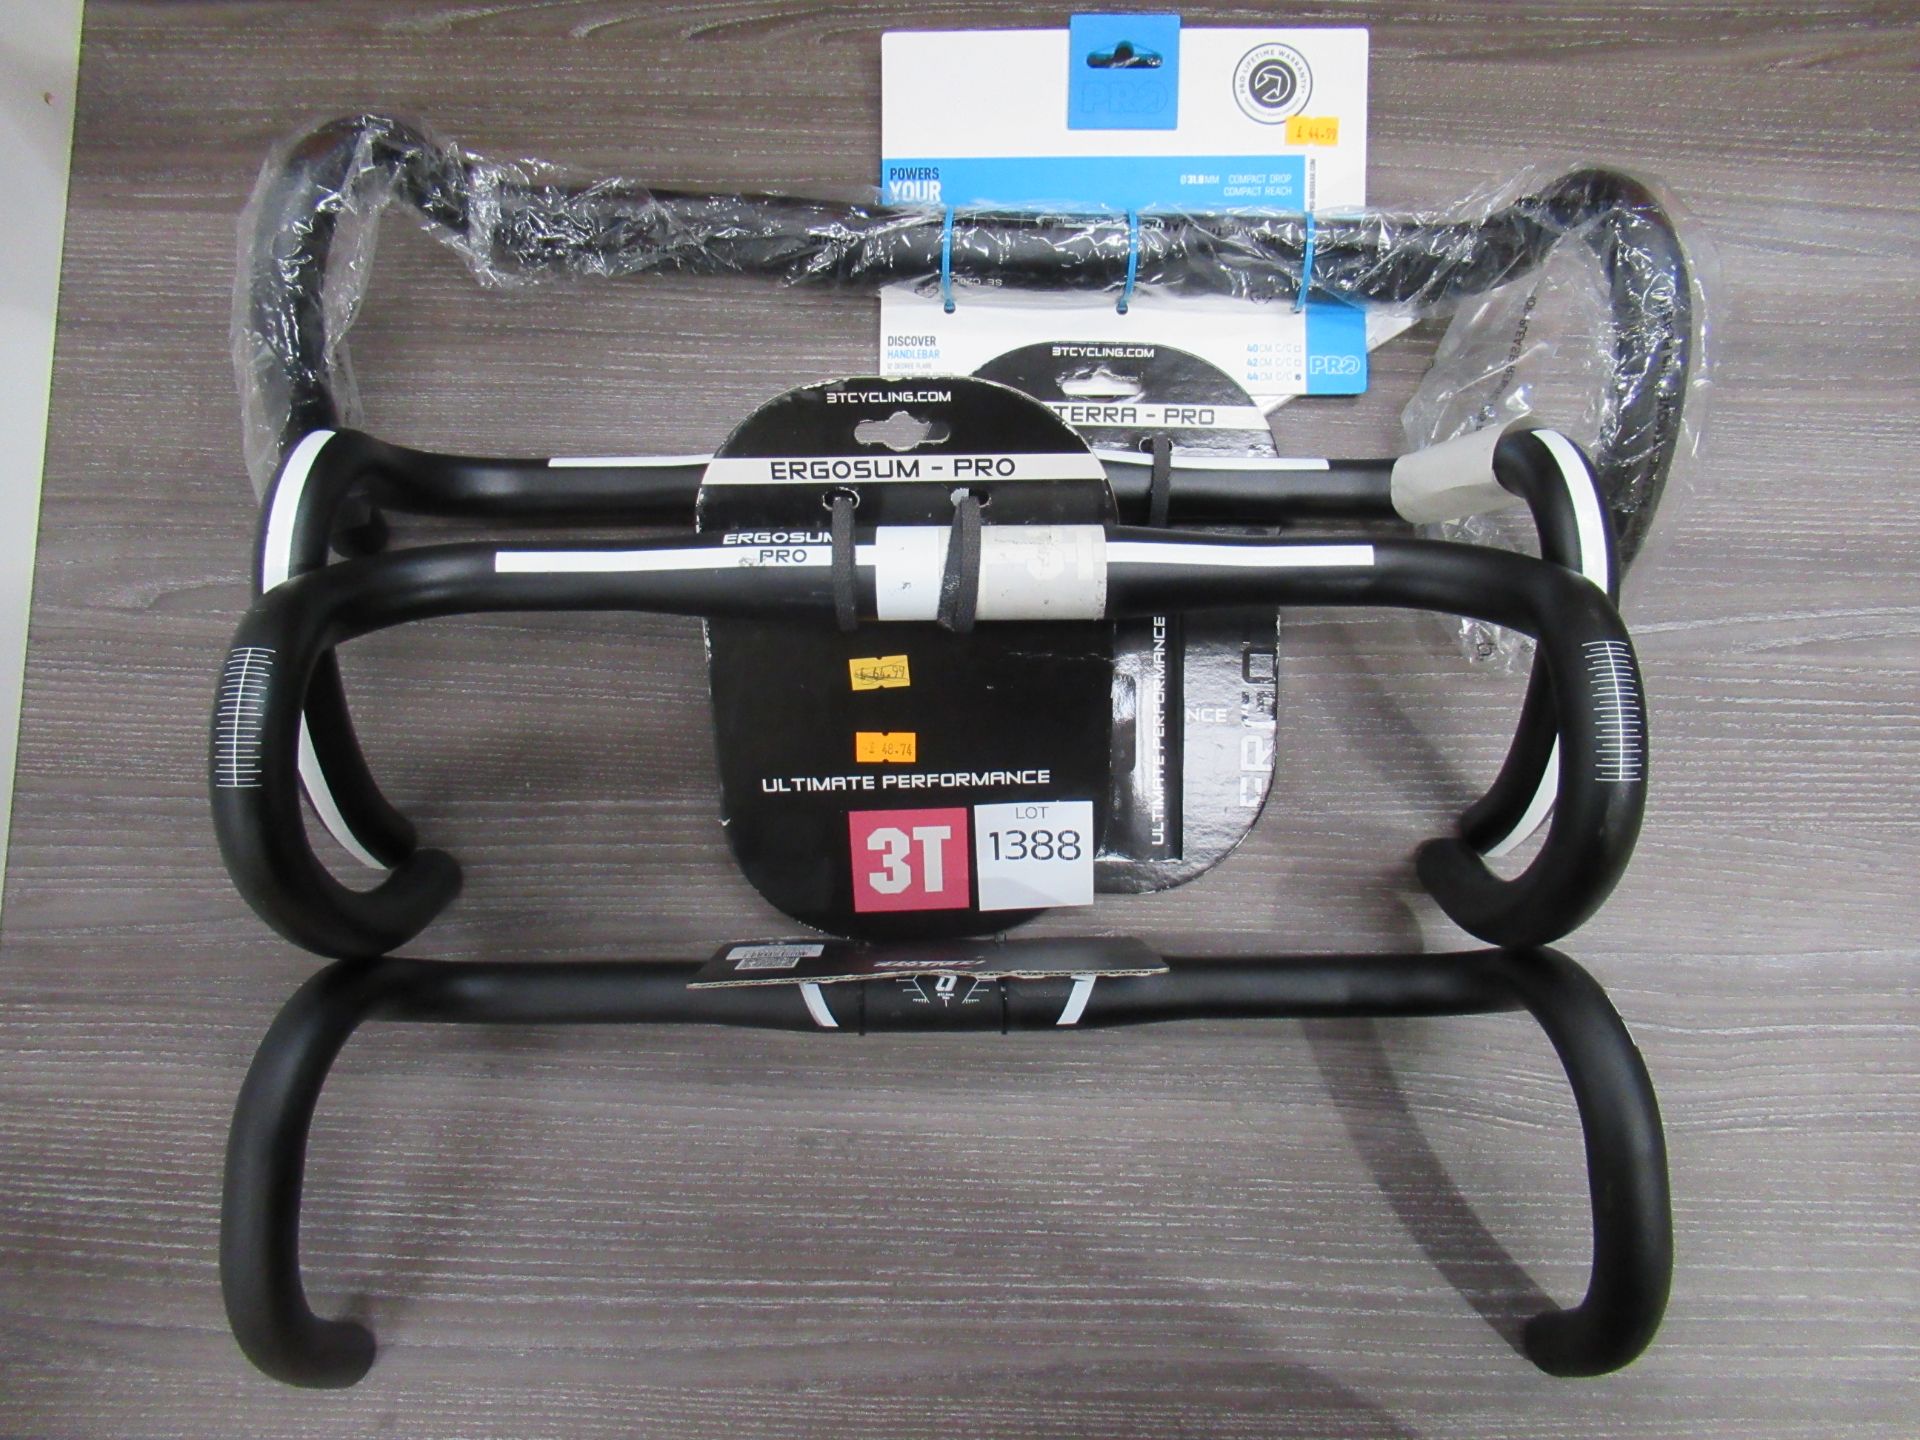 4 x handlebars: 1 x Pro Discover 44cm (RRP£44.99); 2 x 3T Pro (RRP£48.74 each) and Control Tech (RRP